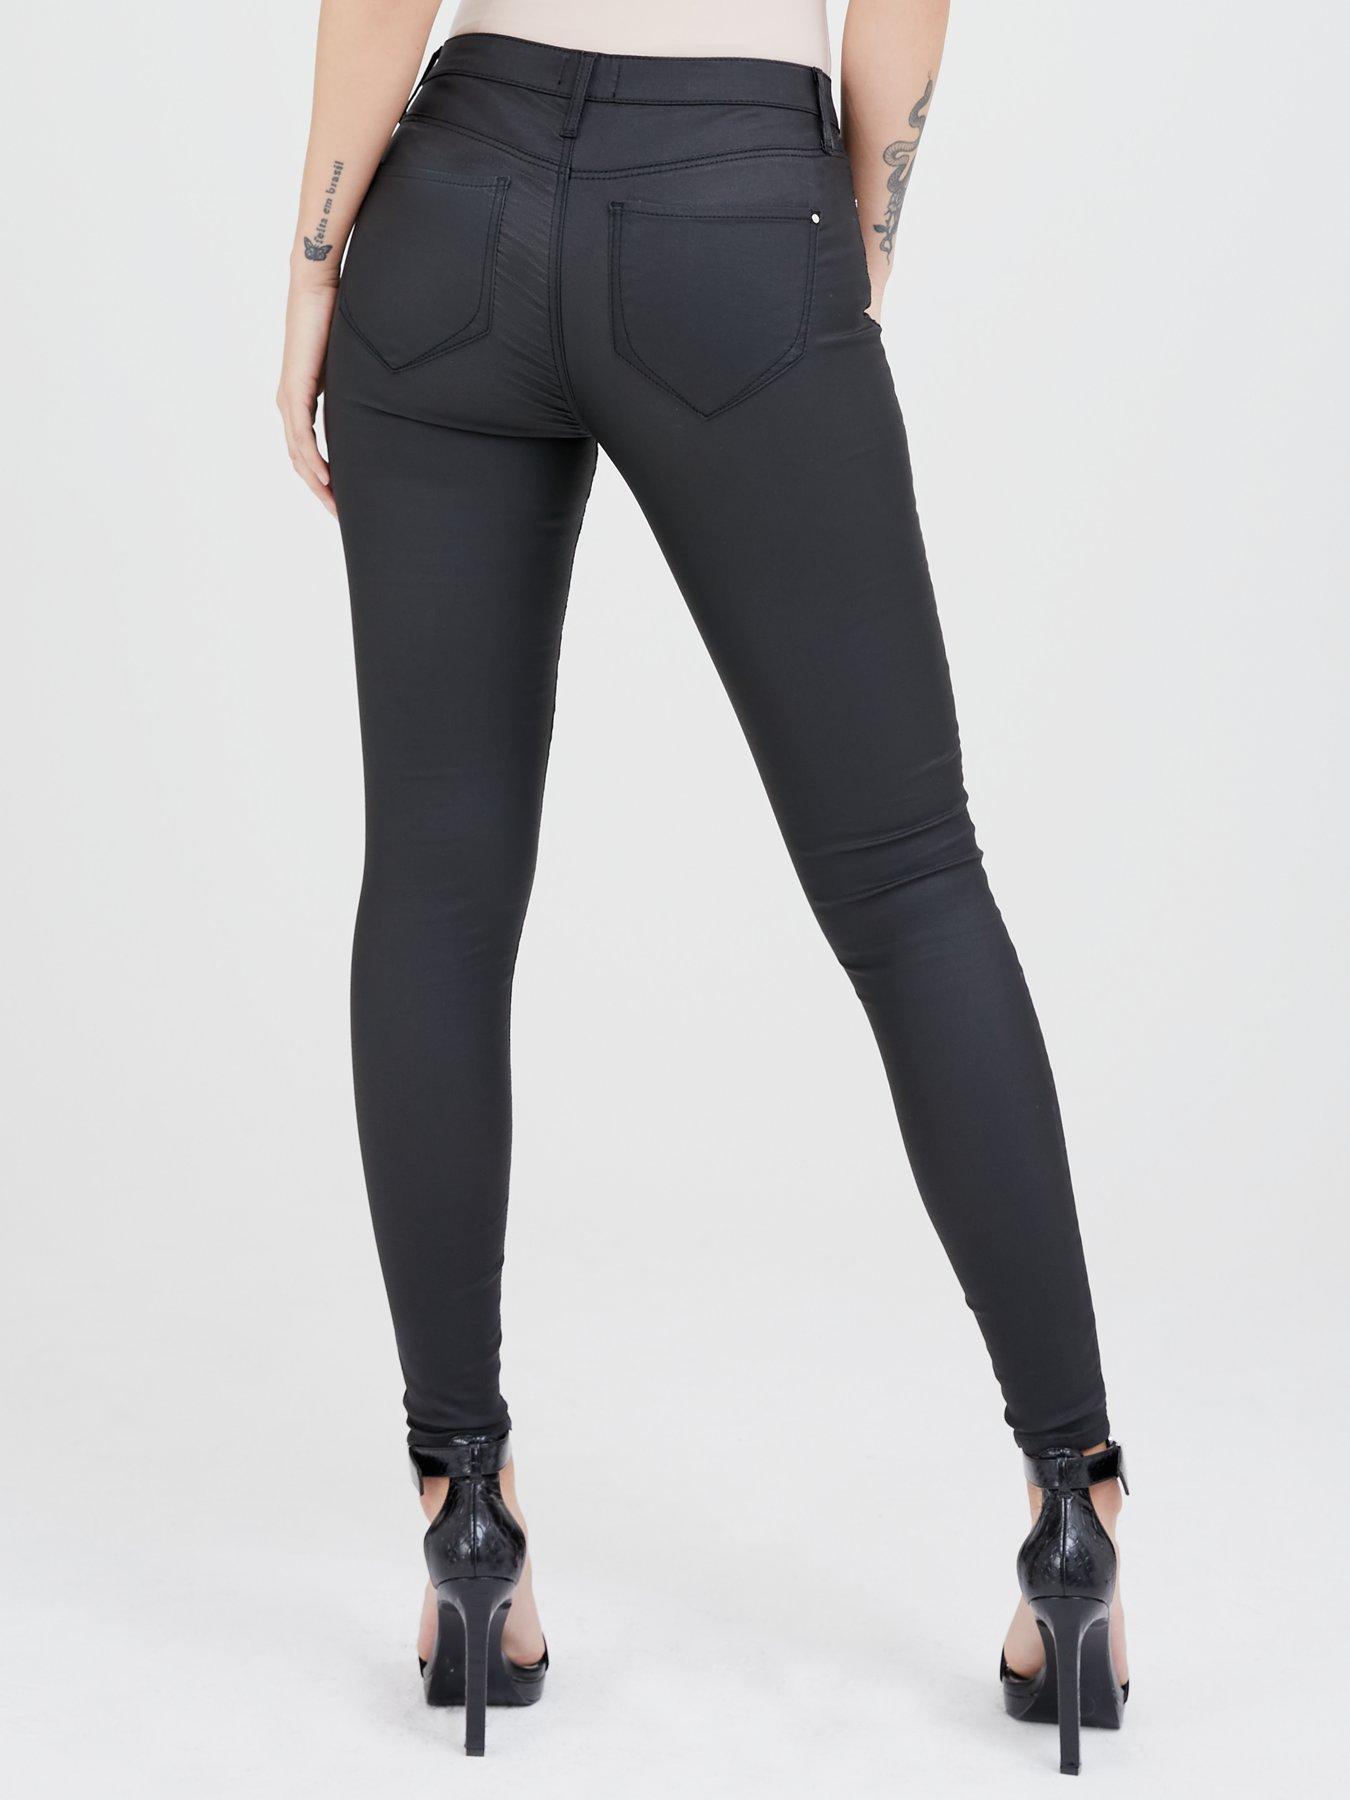 river island molly coated jeggings